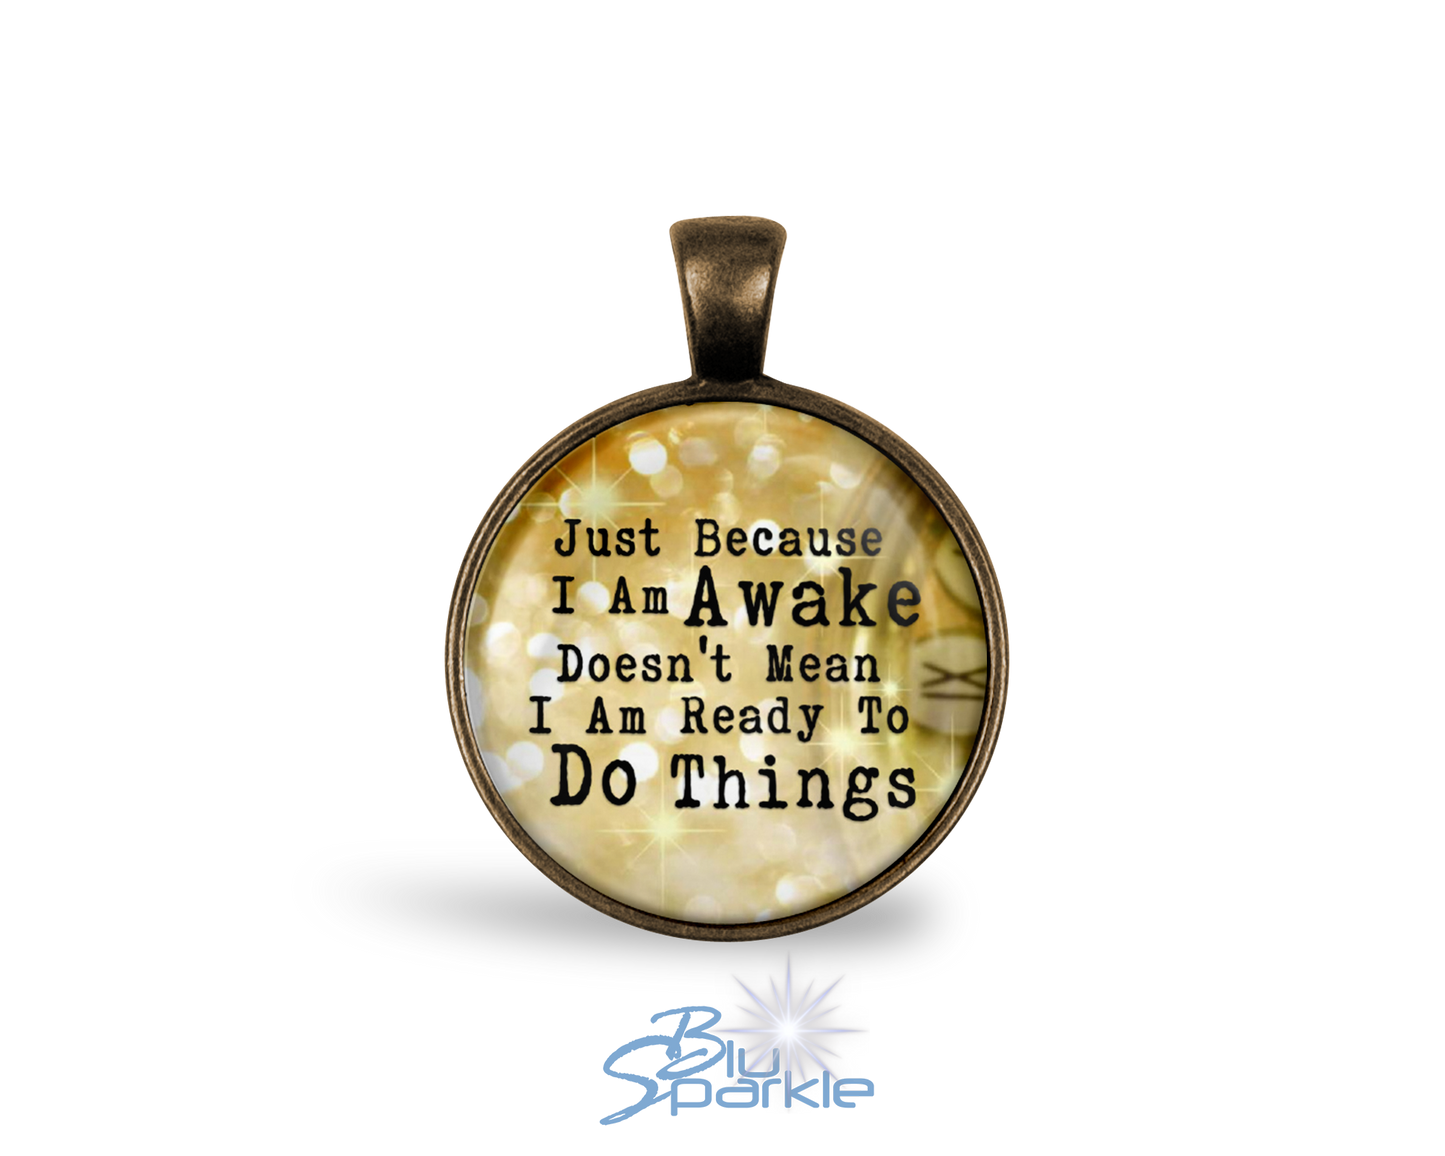 Just Because I am Awake Doesn't Mean I am Ready to Do Things - Round Pendants